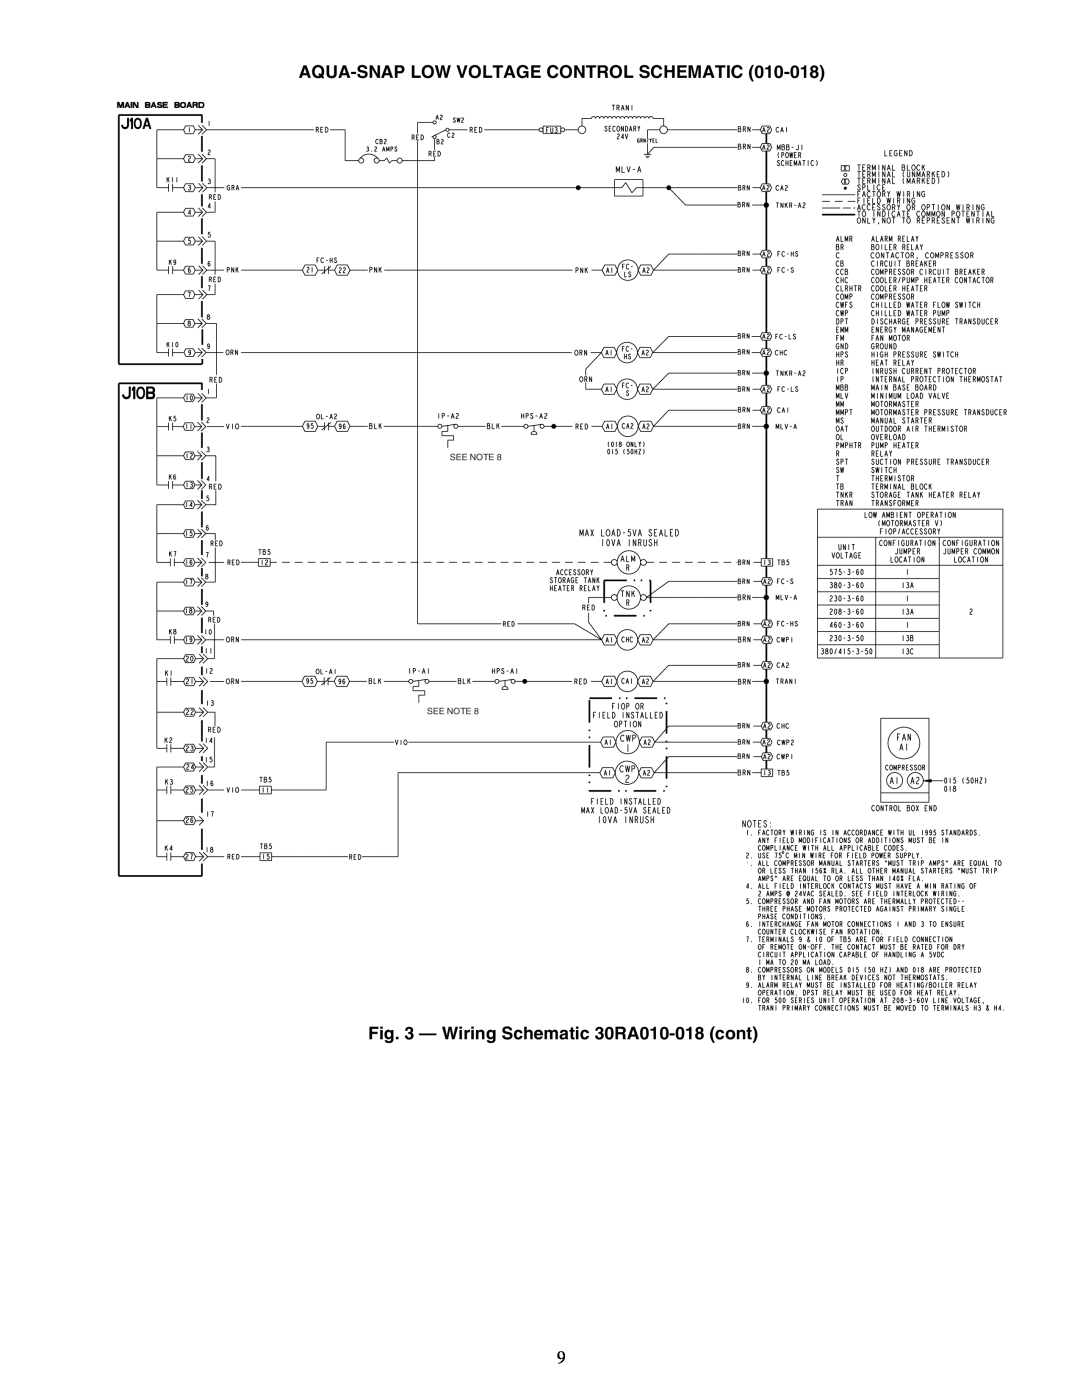 Sterling 30RA010-055 manual Aqua-Snaplow Voltage Control Schematic, Wiring Schematic 30RA010-018cont, See Note See Note 